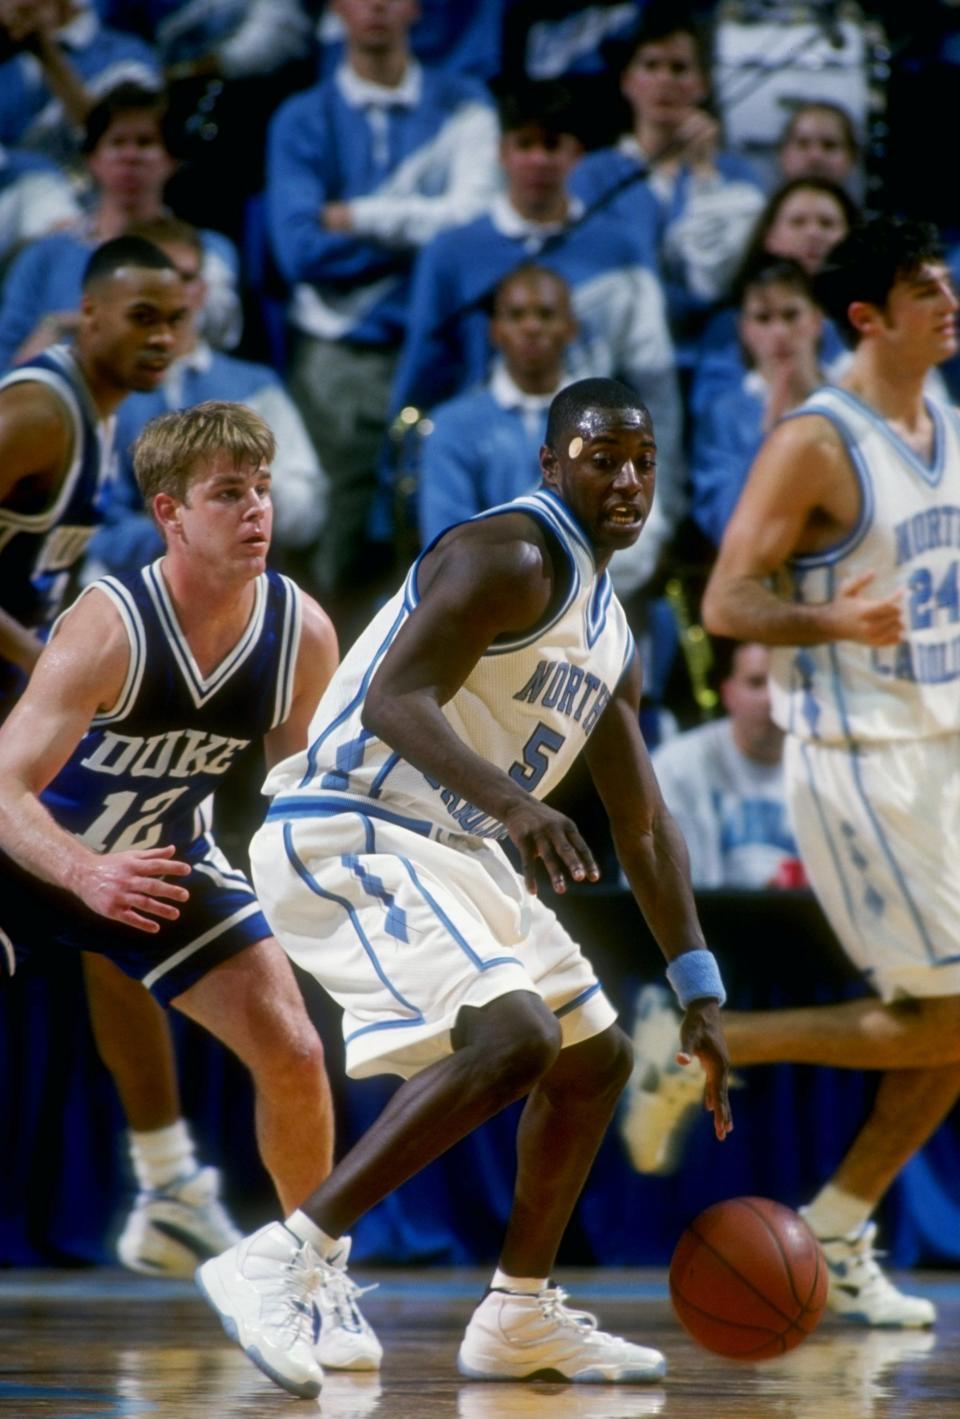 31 Jan 1996: Guard Jeff McInnis of the North Carolina Tar Heels tries to fend off guard Steve Wojciechowski of the Duke Blue Devils during a game at the Dean Smith Center in Chapel Hill, North Carolina. North Carolina won the game 73-72. Mandatory Credi